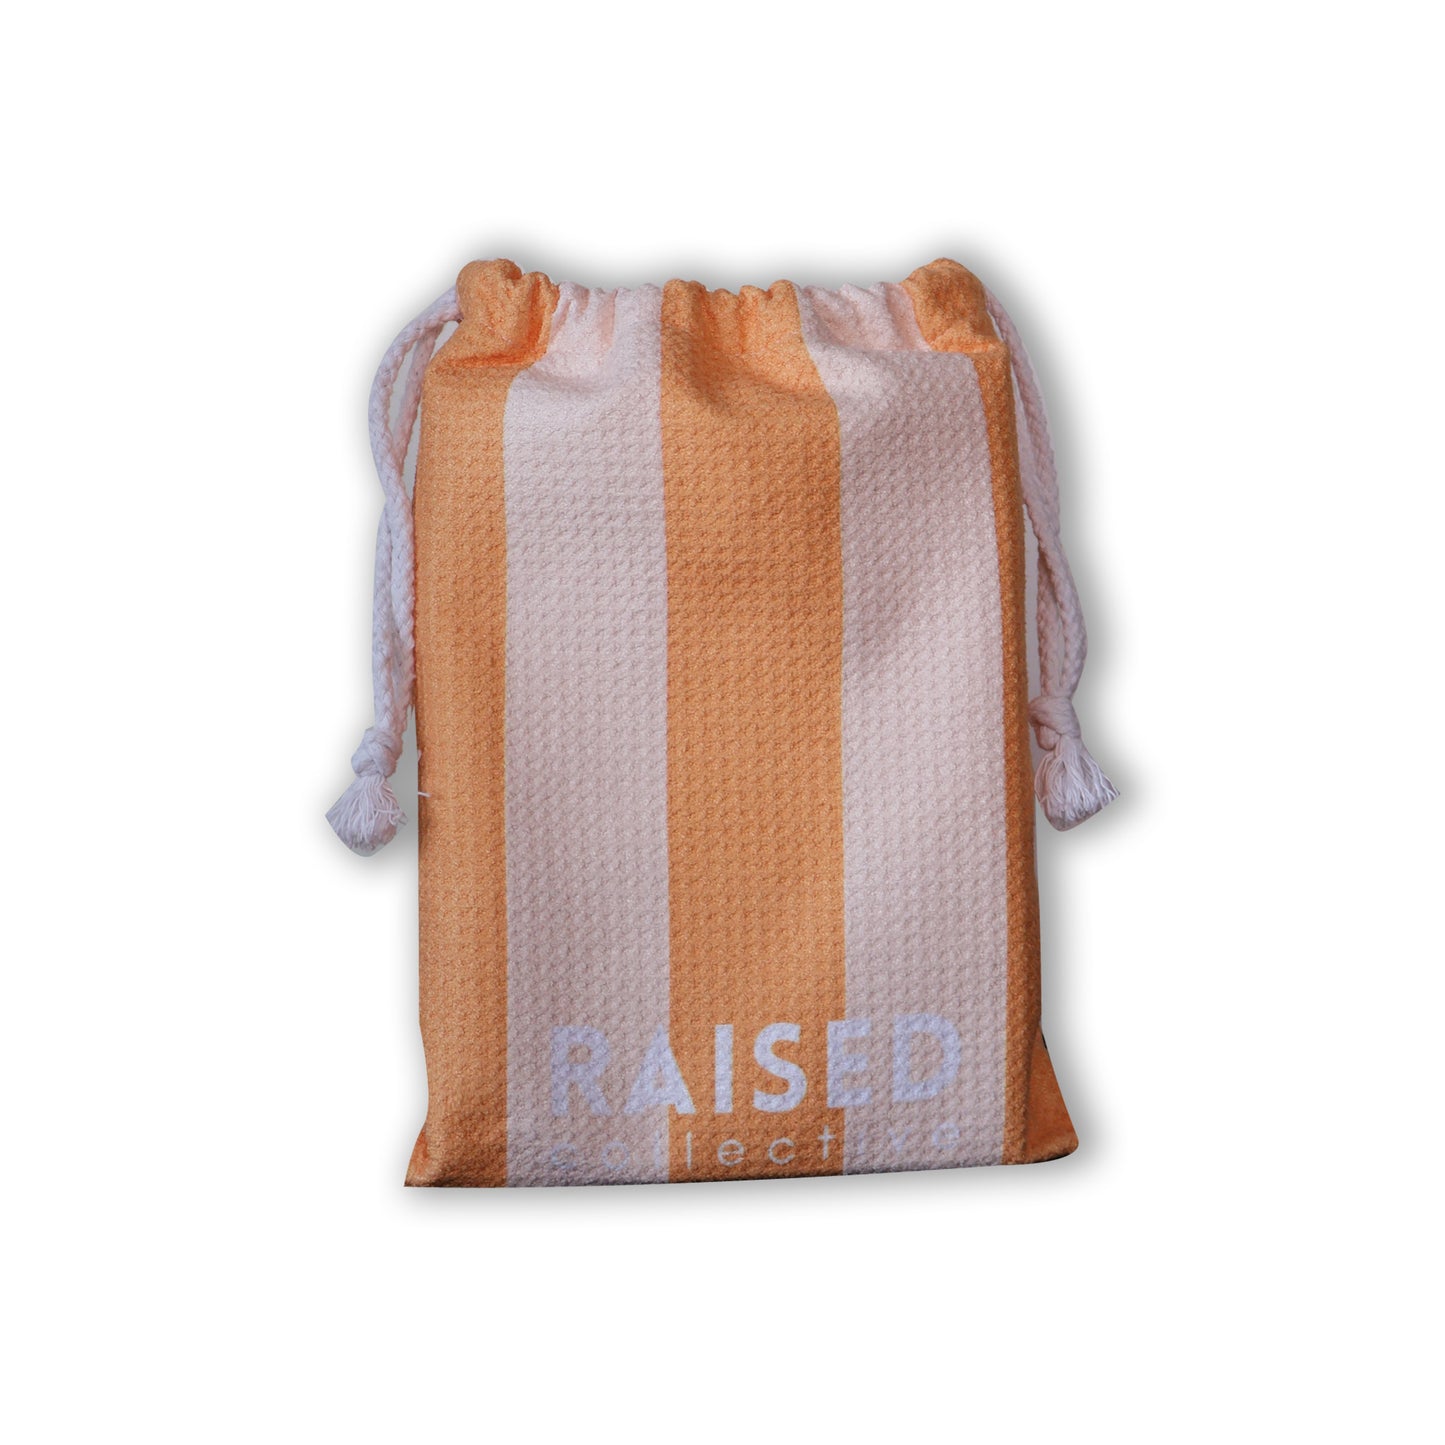 Amalfi sand free beach towel in carry case, travel friendly, compact and fast drying!